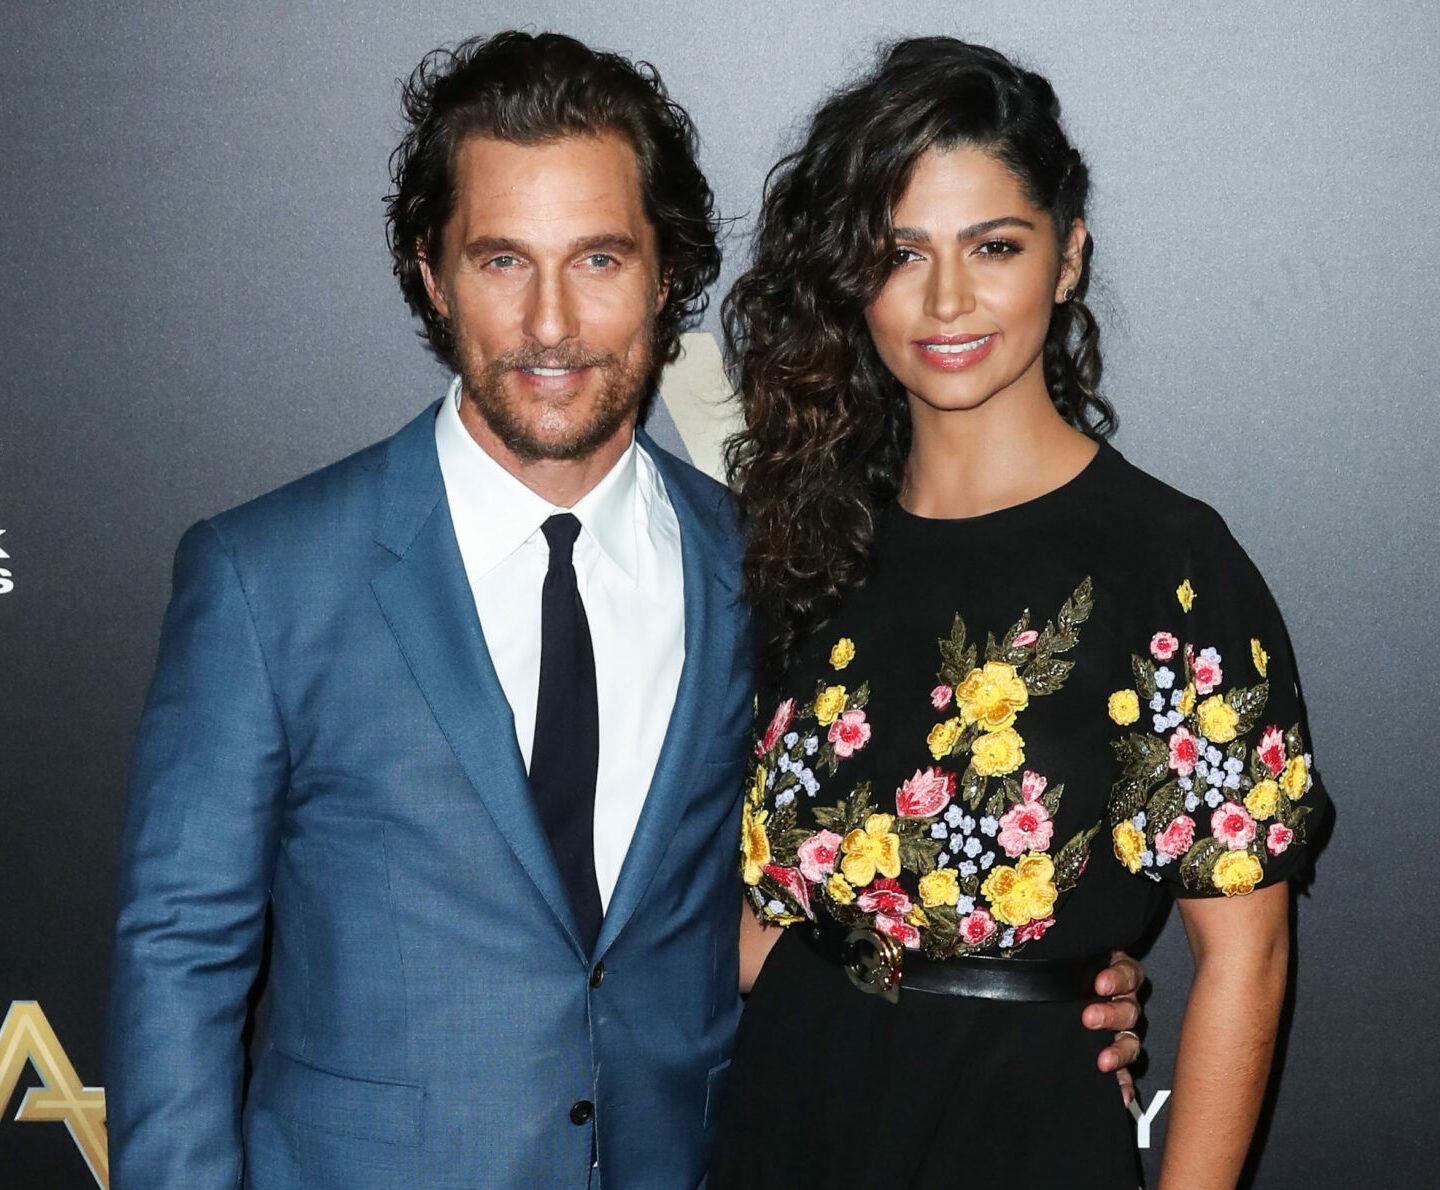 Camila Alves Shares How Her Mother-In-Law 'Really' Tested Her